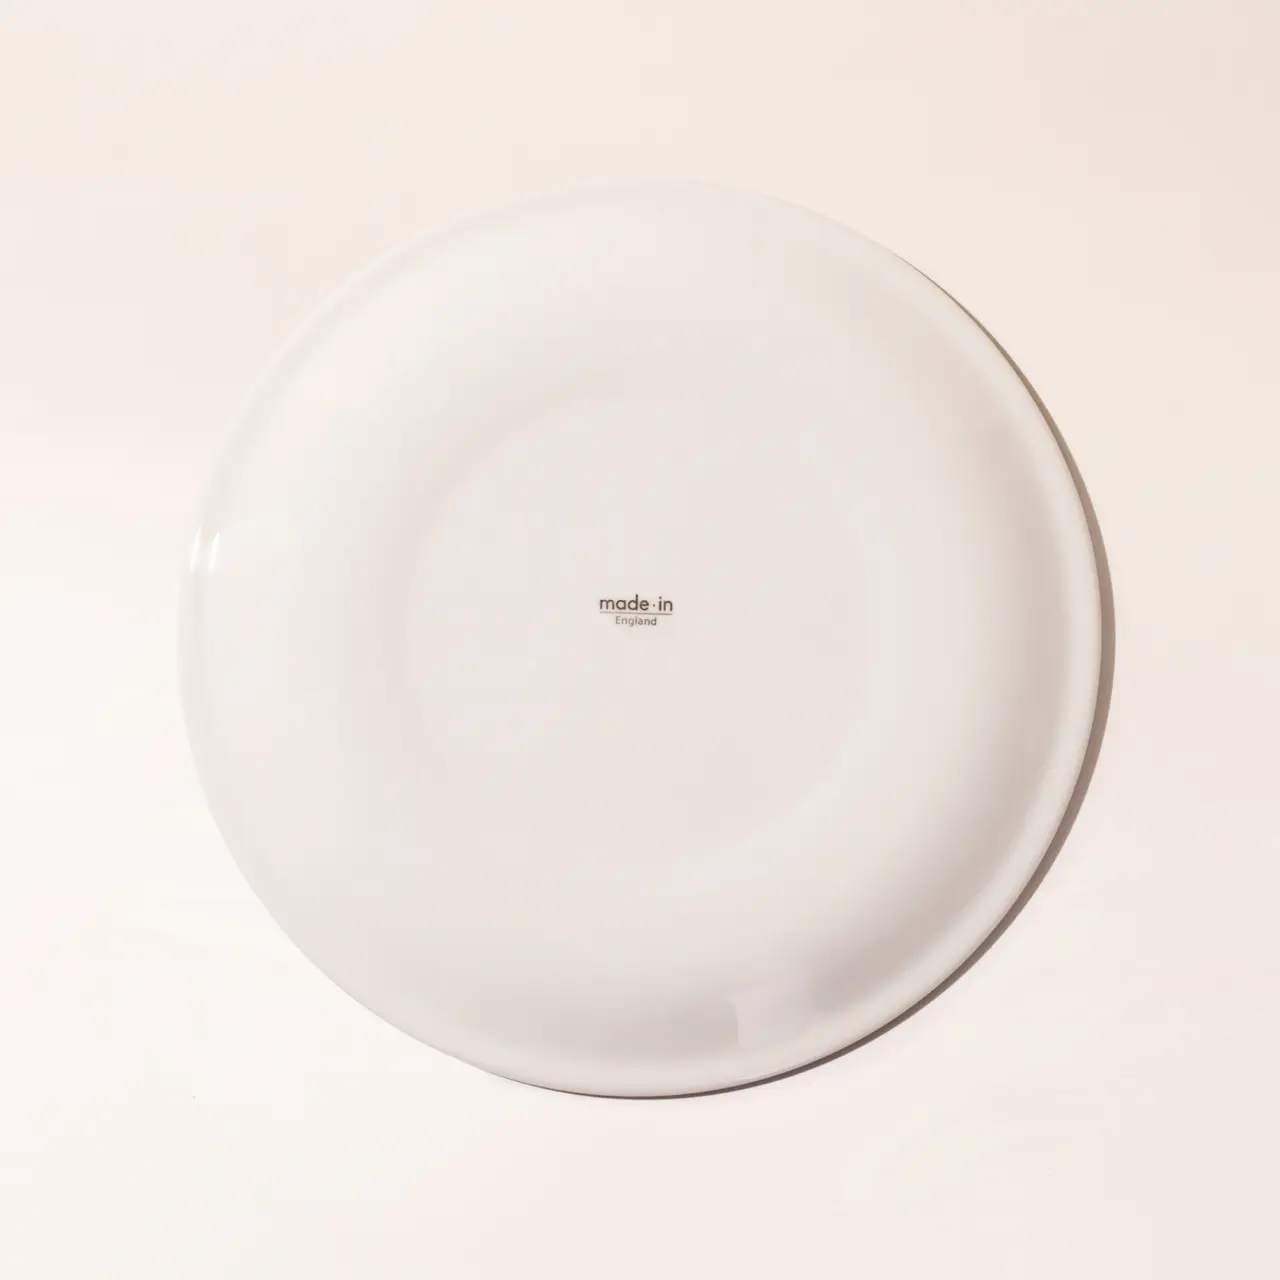 A plain white plate with a small text "made.in" in the center sits against a light background.